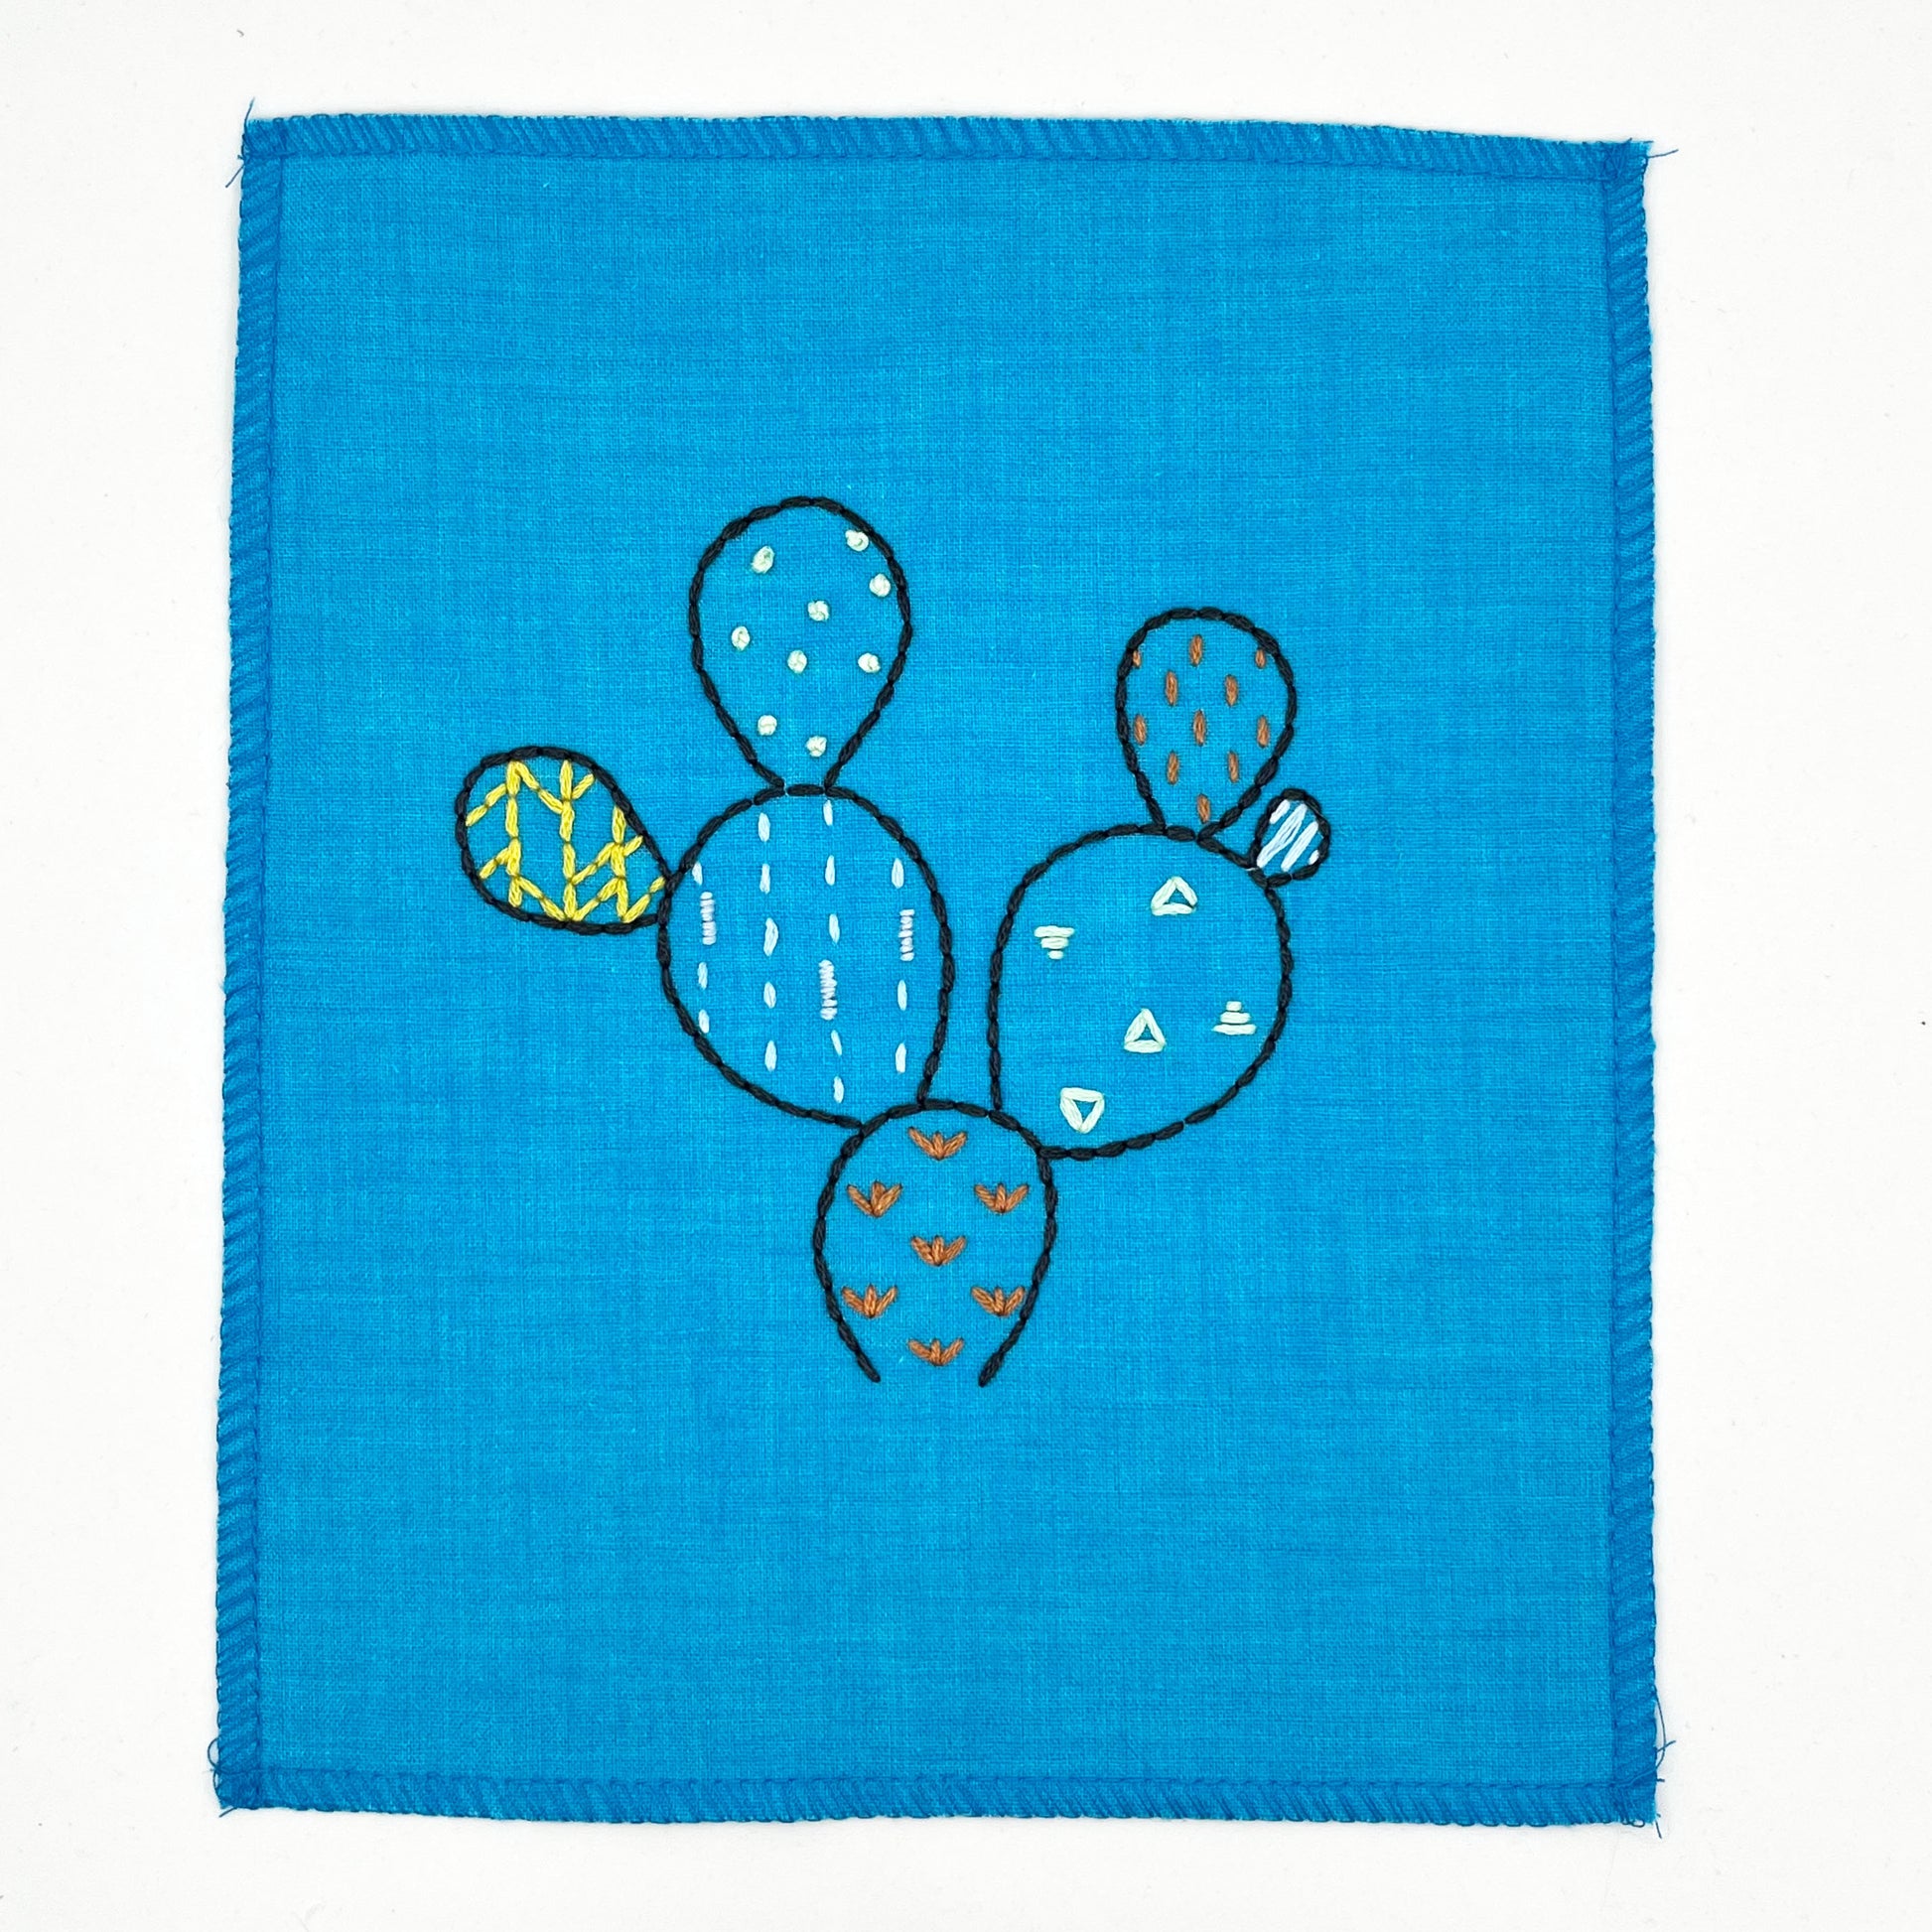 a small bright blue fabric wall hanging, hand embroidered with the outline of a prickly pear cactus in dark blue, each pad filled with different stitches like french knots, running stitches and triangles, in different colors, on a white background